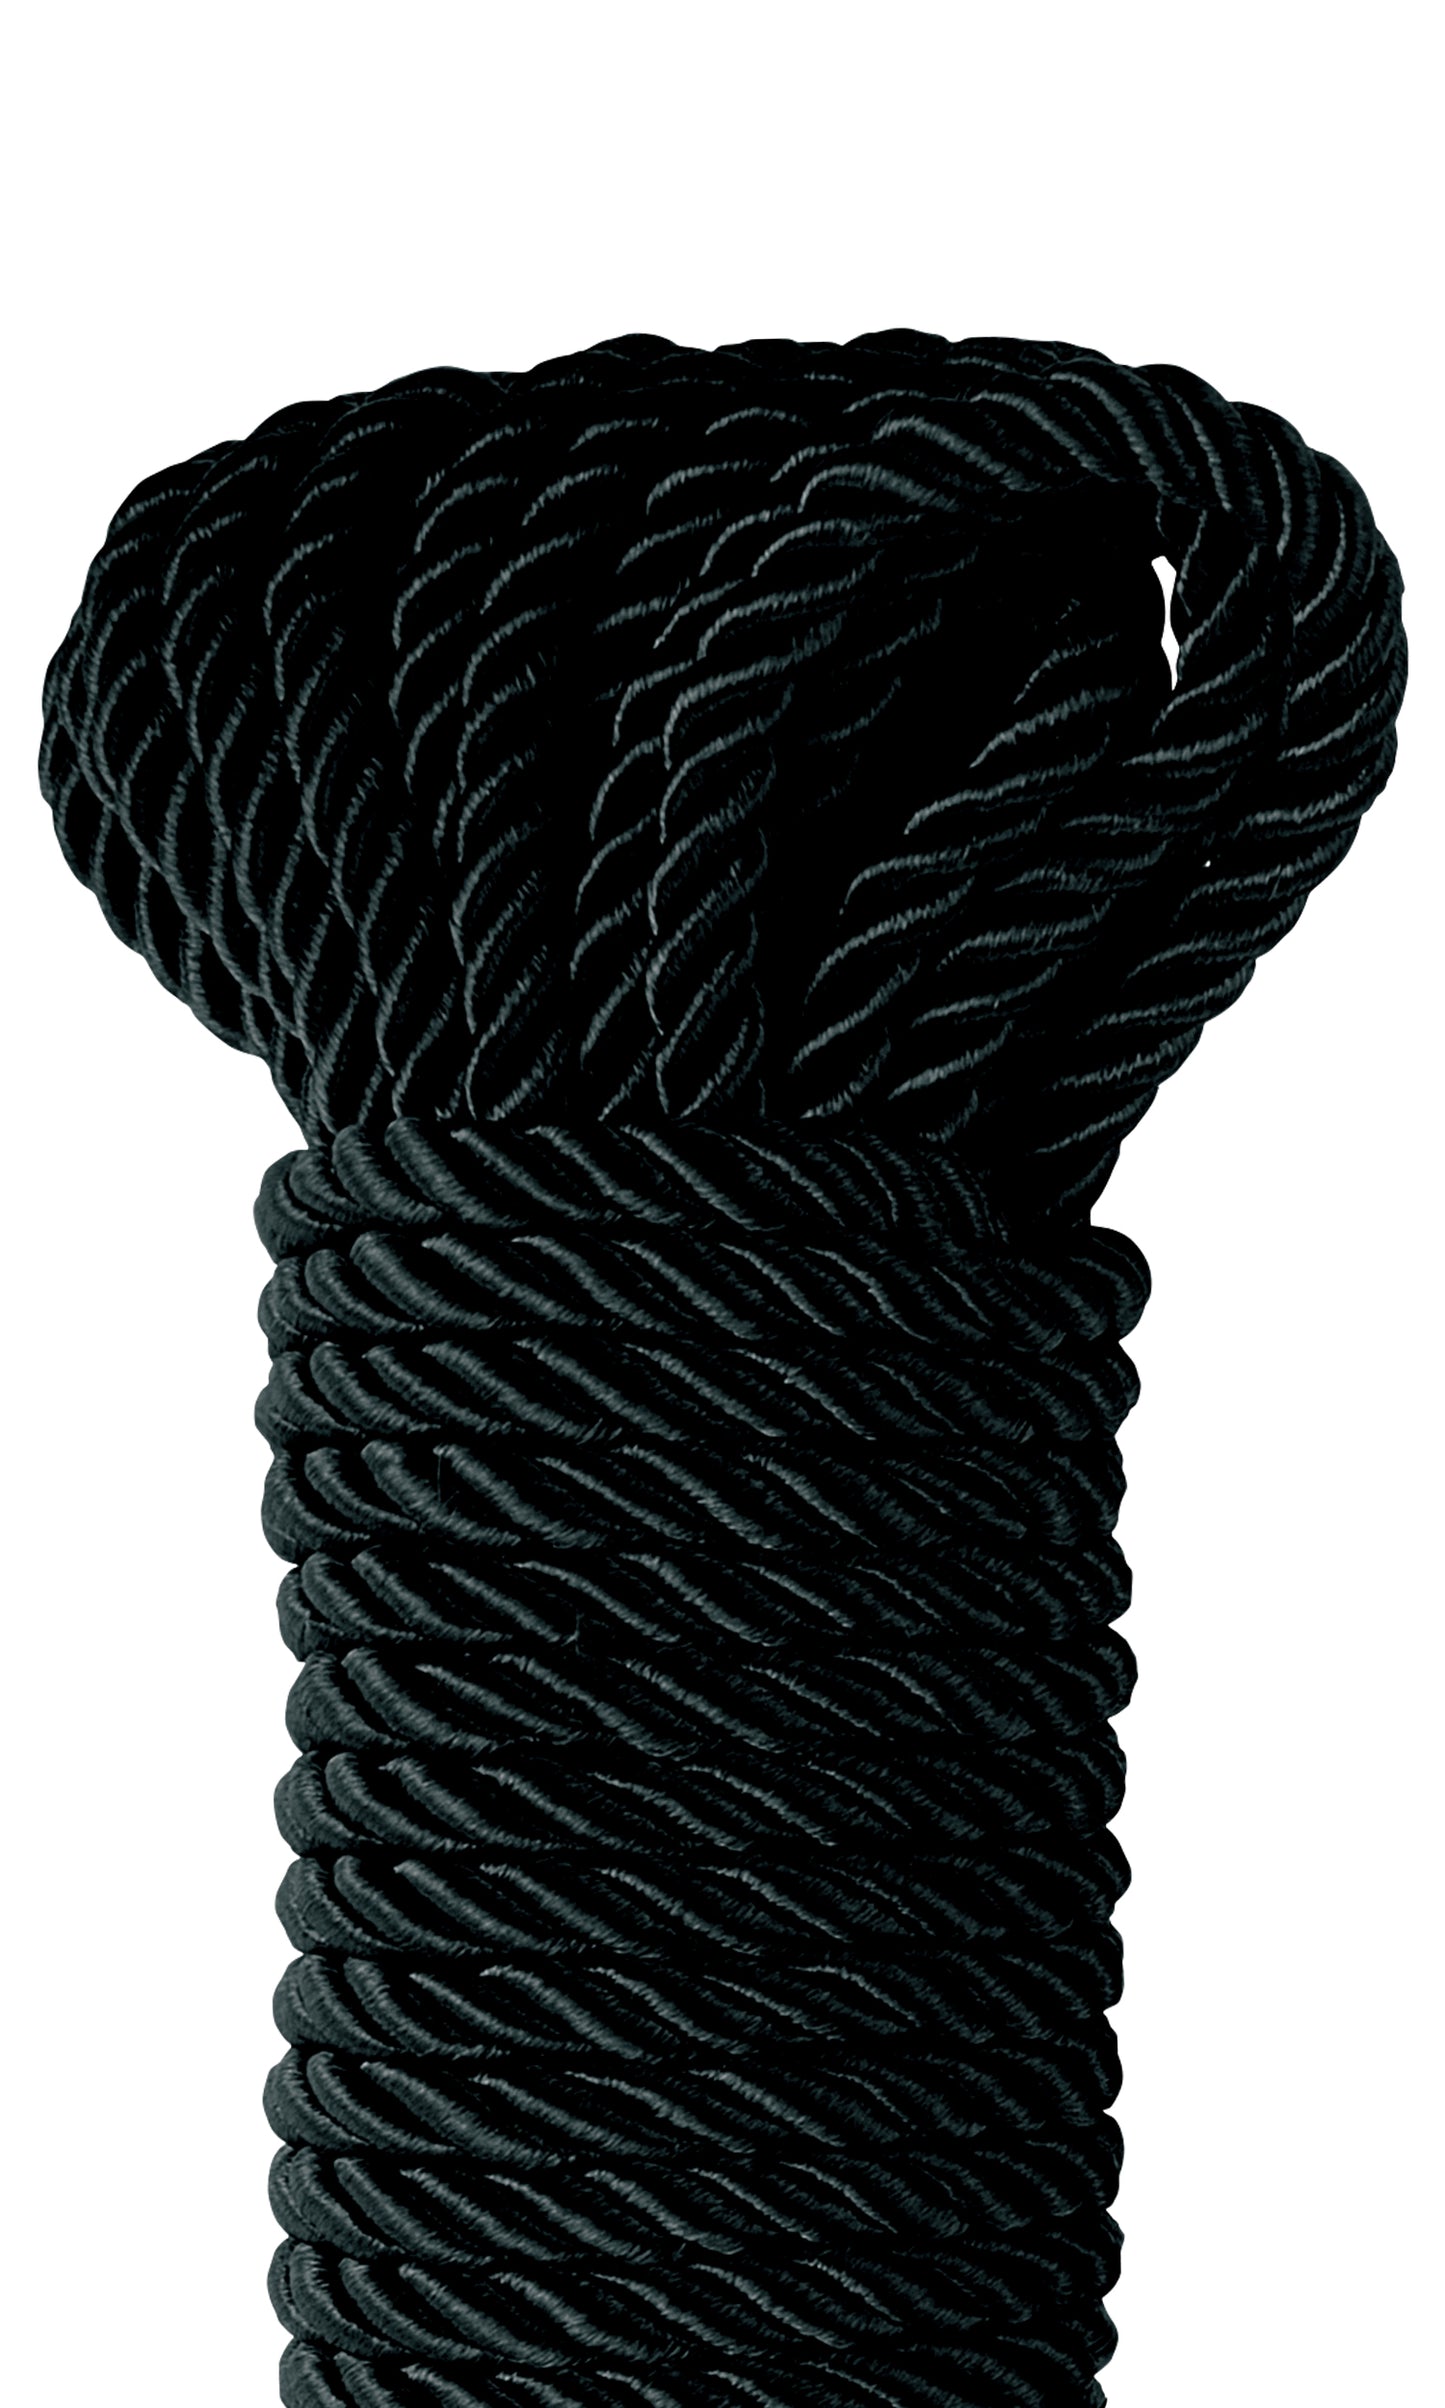 Fetish Fantasy Series Deluxe Silky Rope - Black PD3865-23